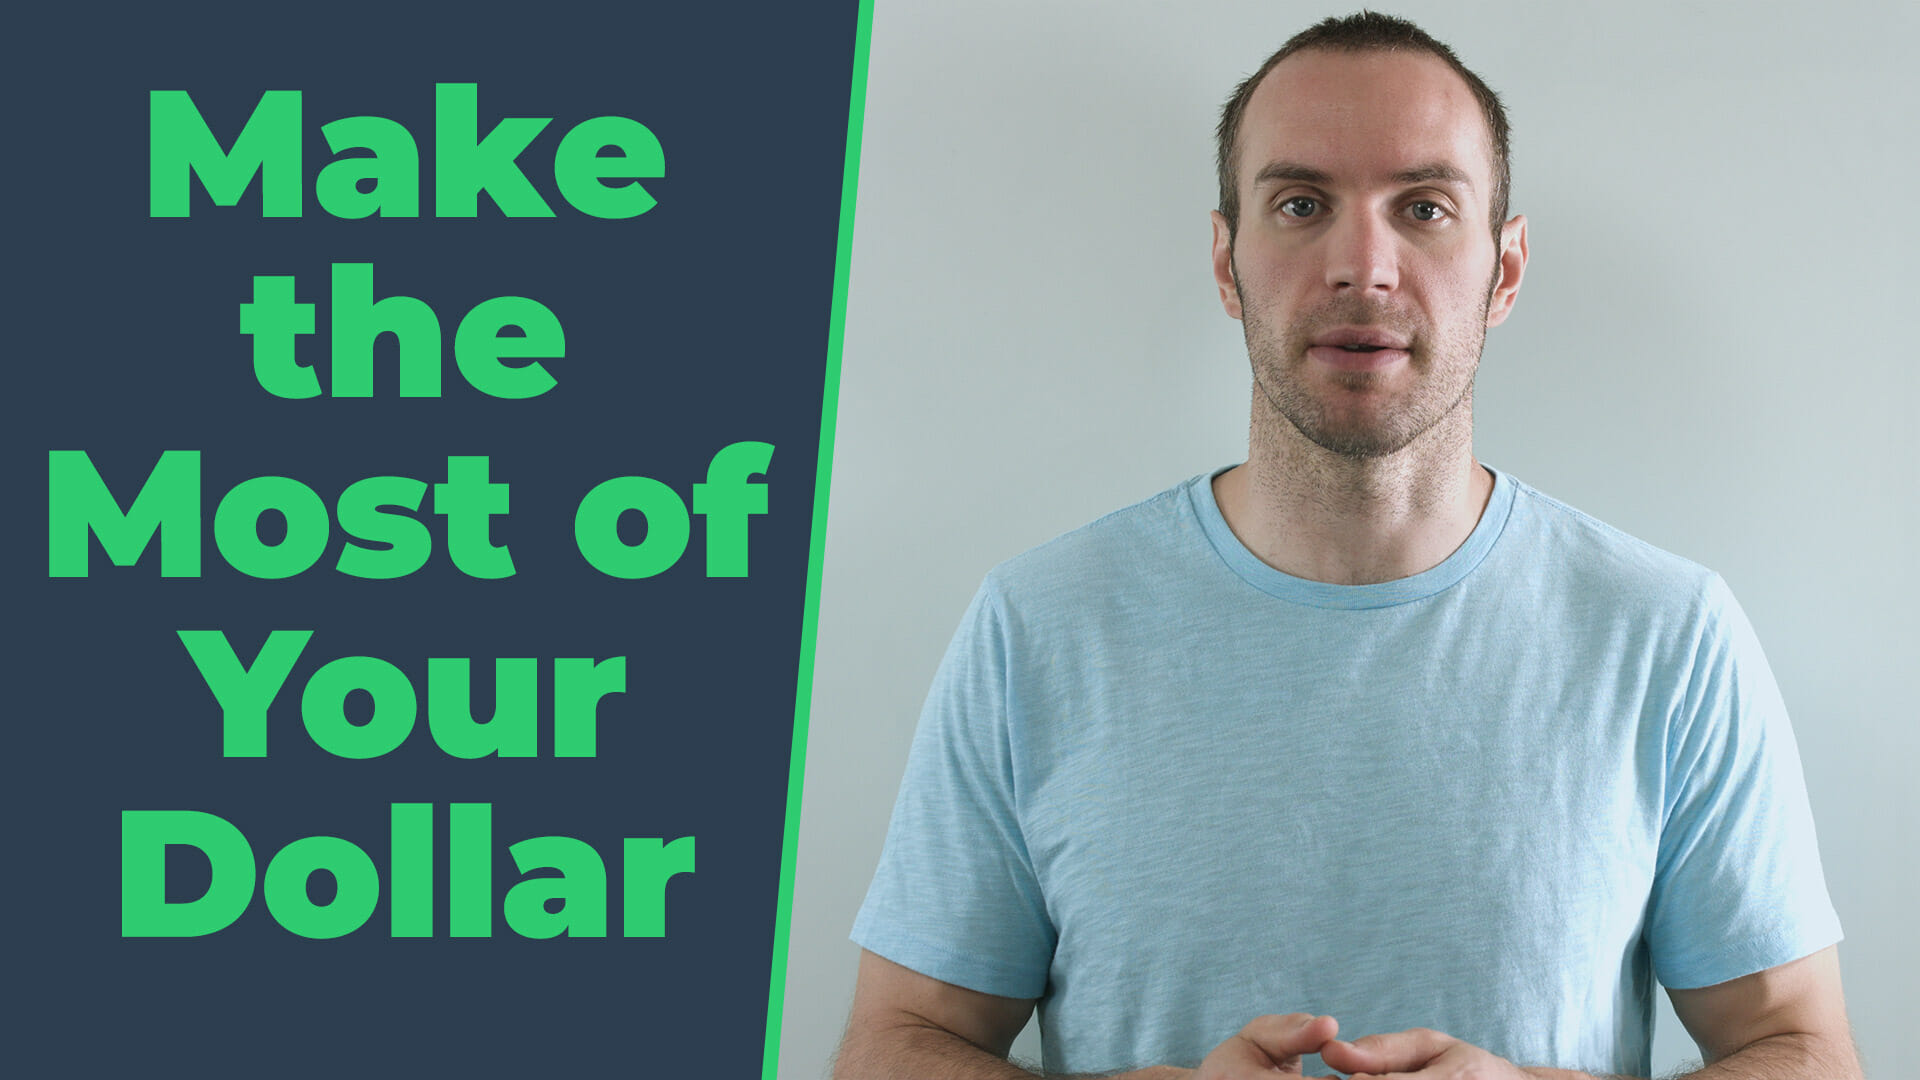 Make the Most of Your Dollar